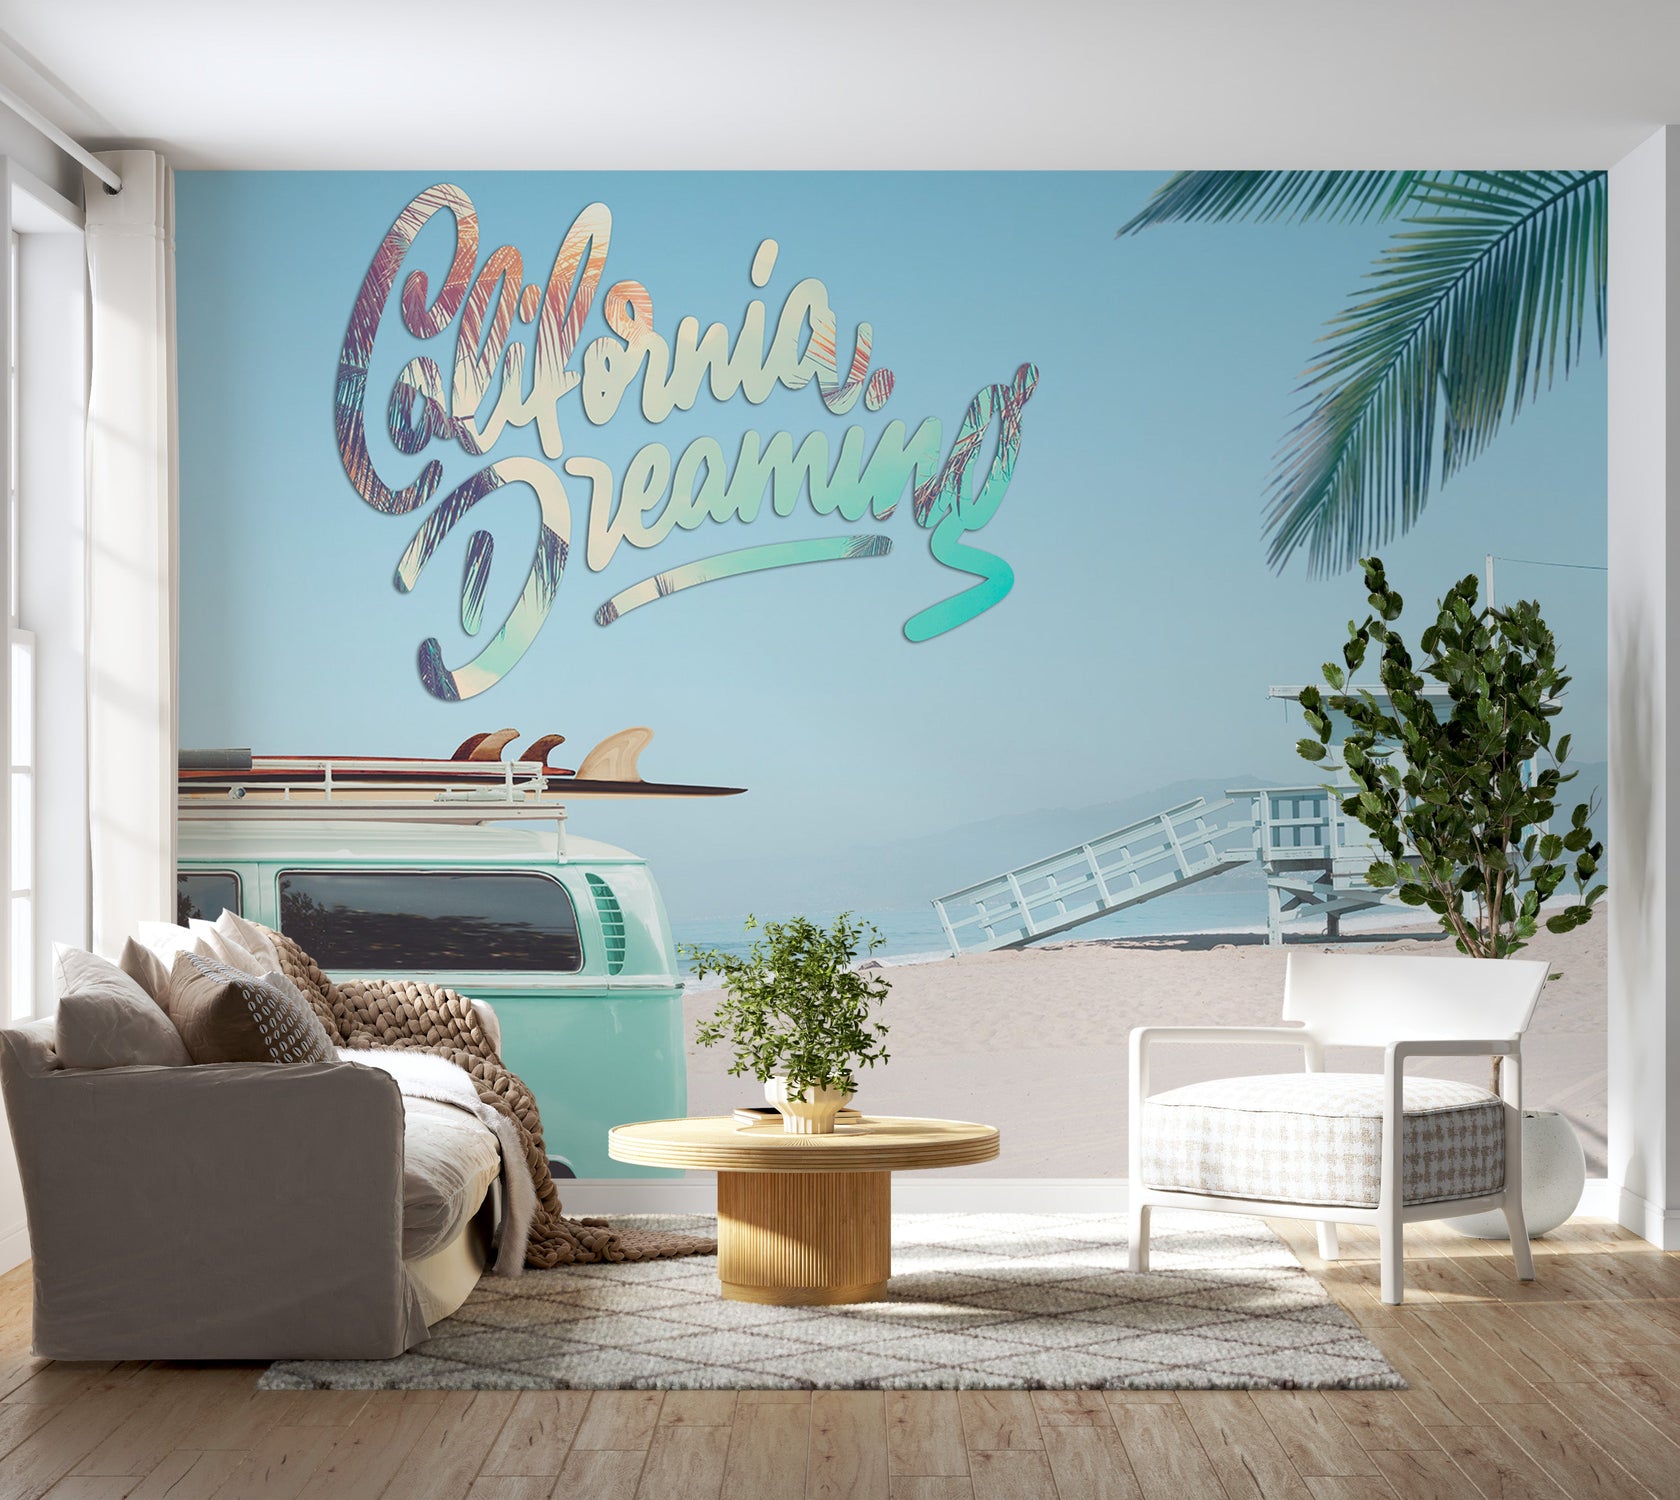 Peel & Stick Surf Wall Mural - California Dreaming - Removable Wall Decals-Tiptophomedecor